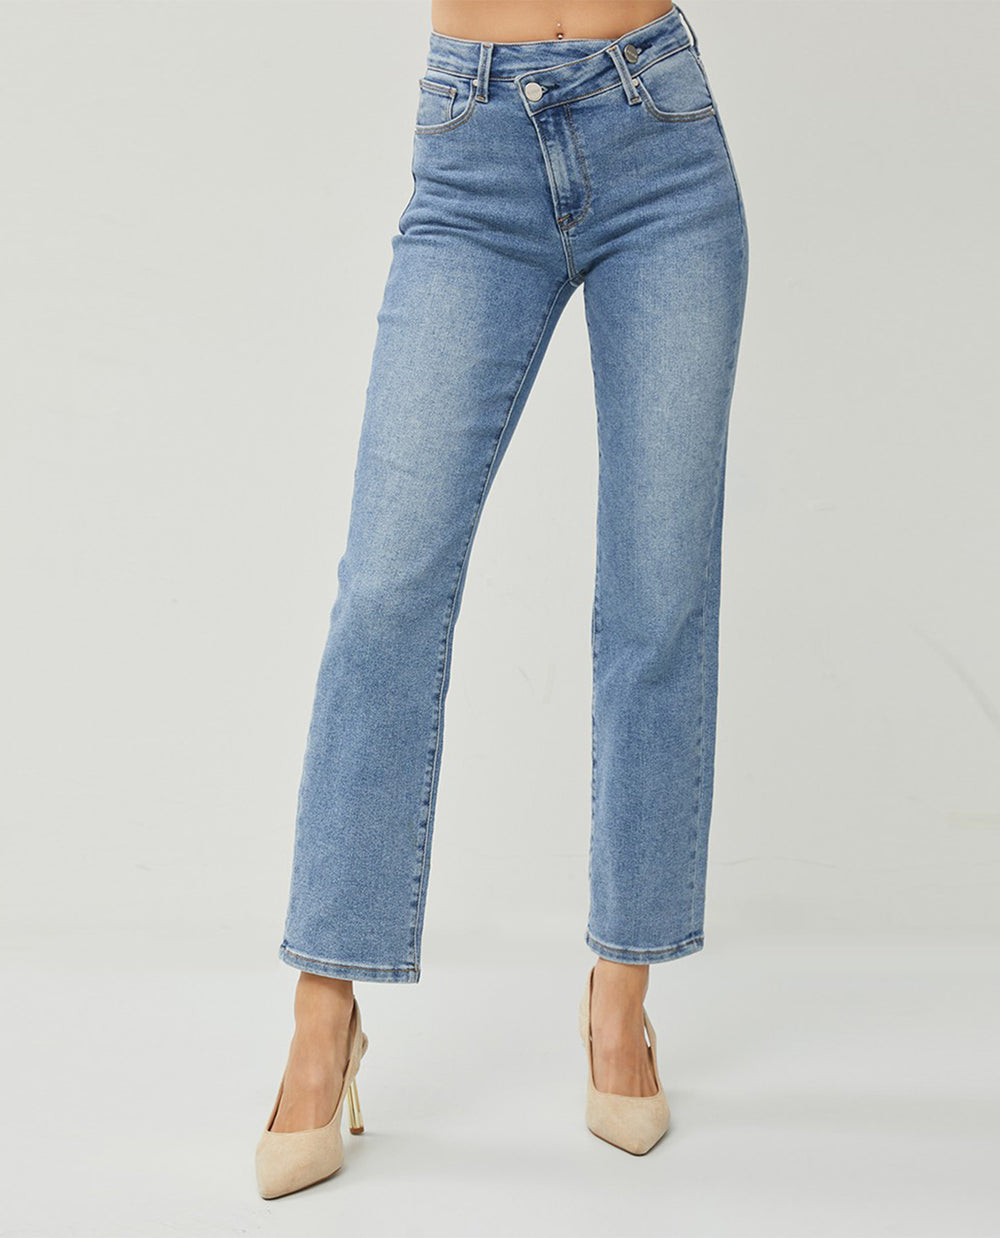 Christopher Kane High-Rise Straight Leg Jeans - Blue, 11.5 Rise Jeans,  Clothing - CHI28568